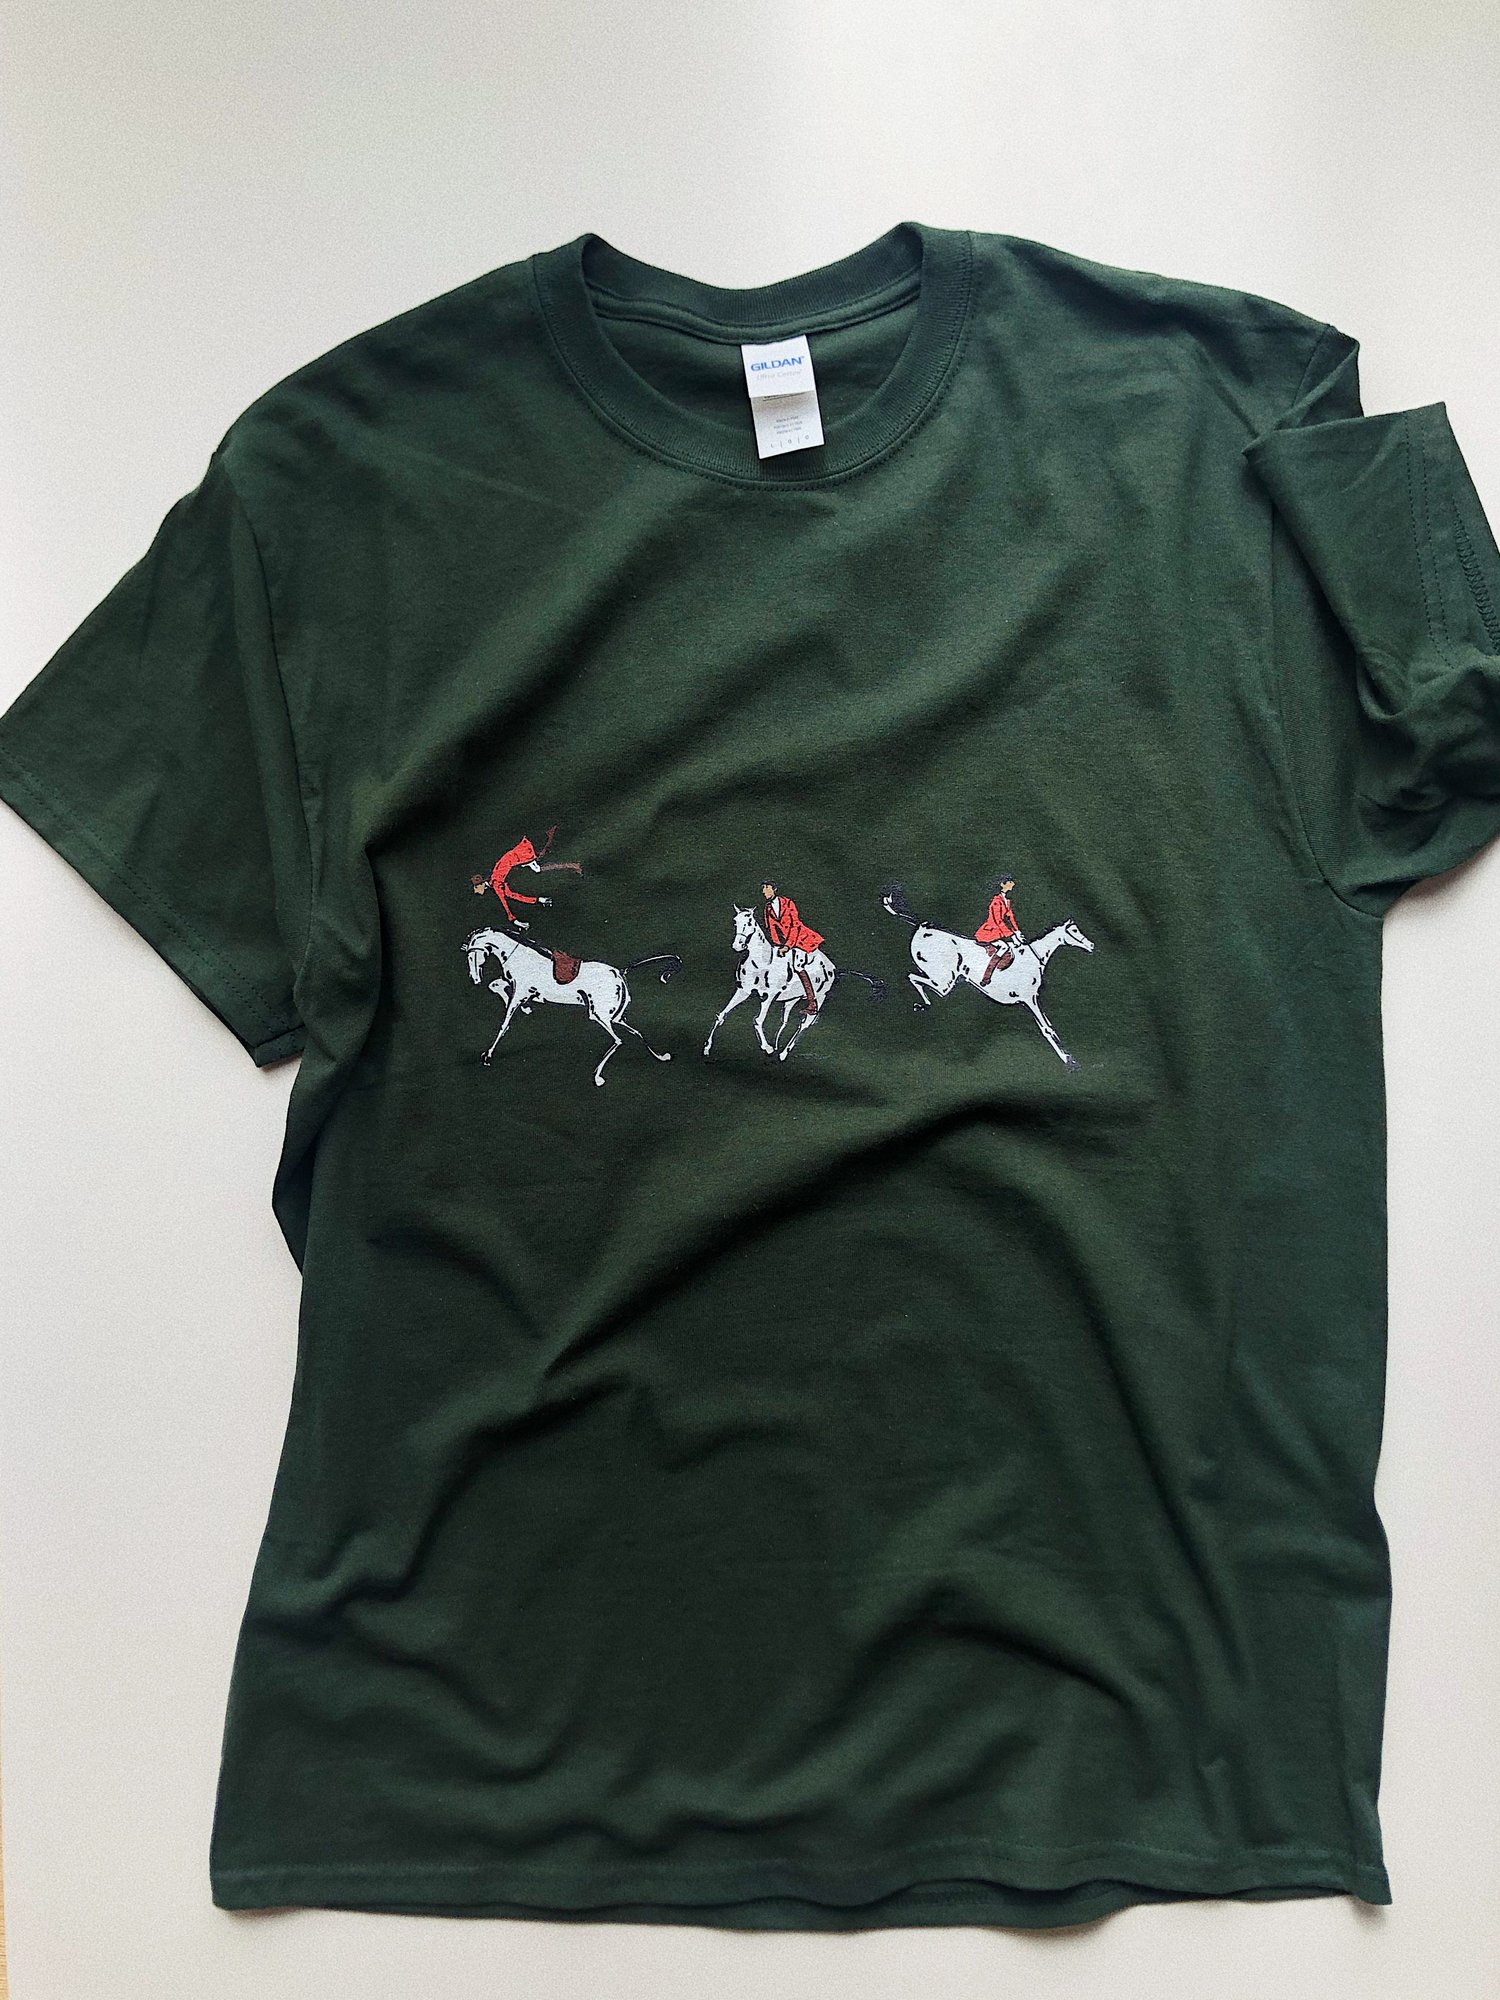 GREEN FOREST T-SHIRT RIDING 35€ (4,500¥ approx)